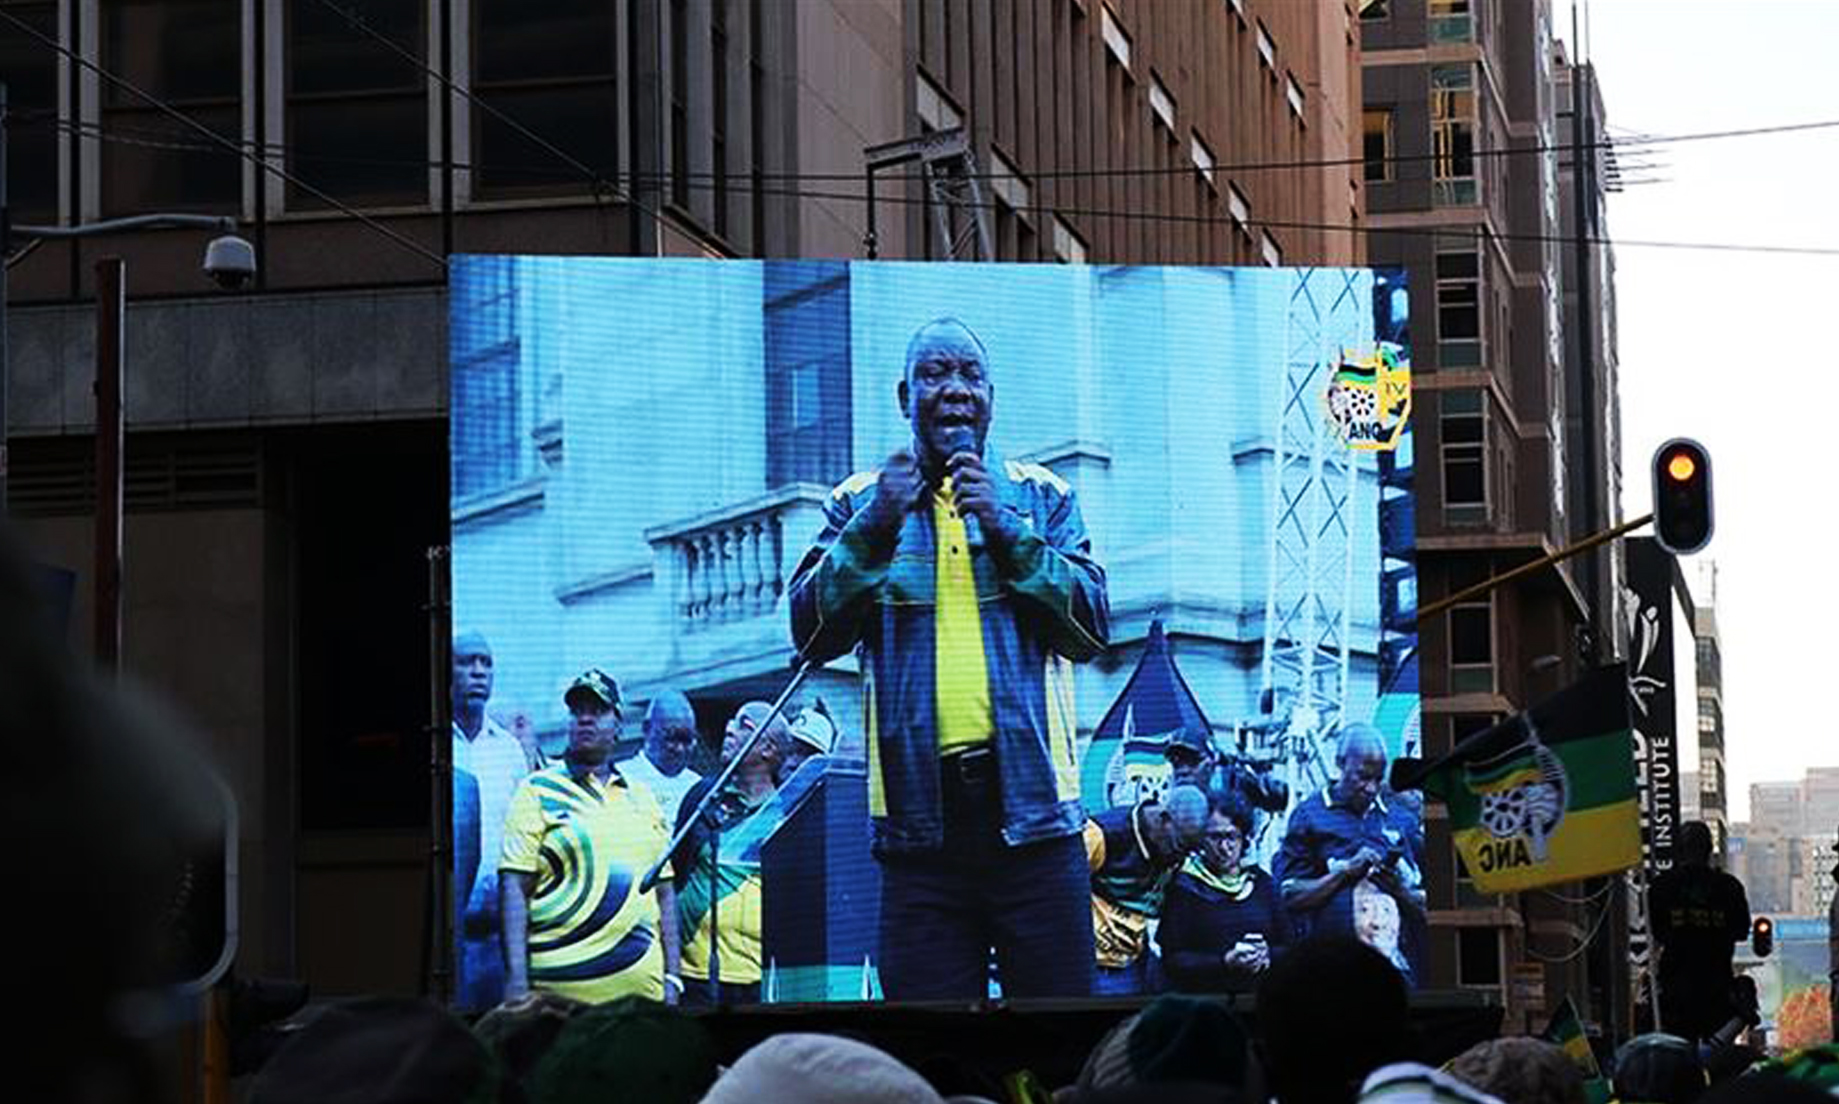 South Africa’s ANC celebrates election win with street party